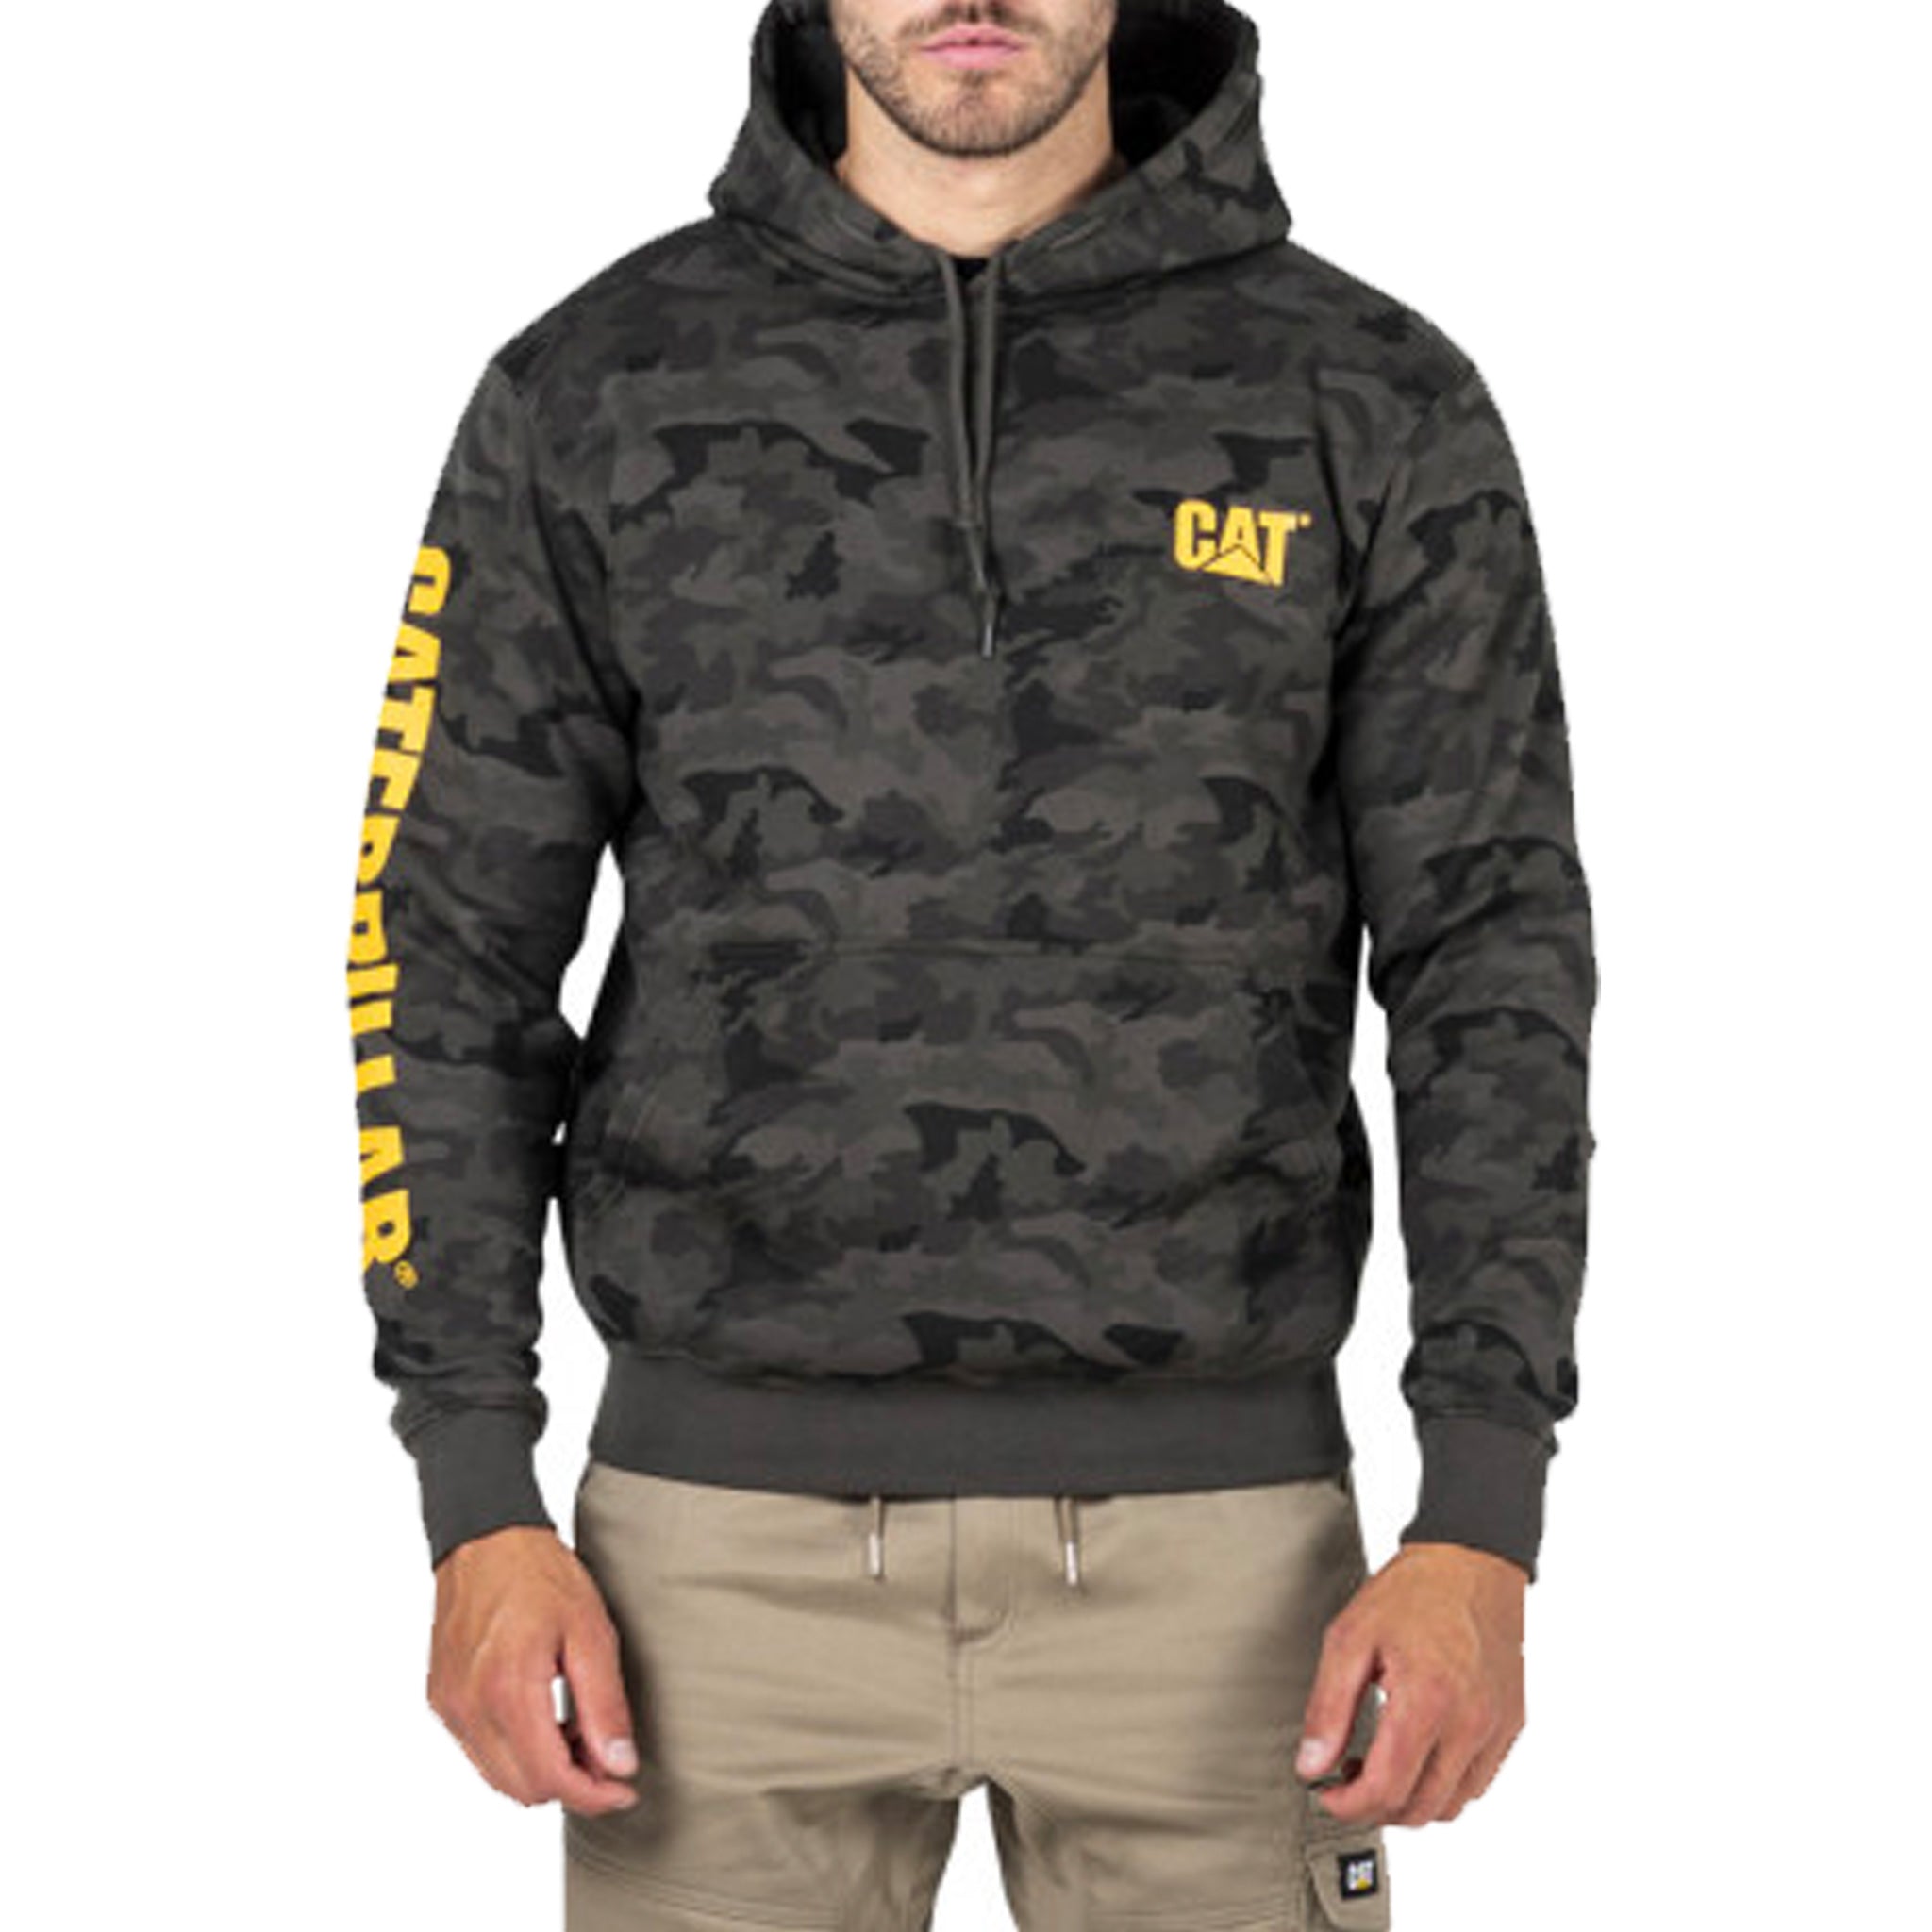 cat workwear hoodie in night camouflage